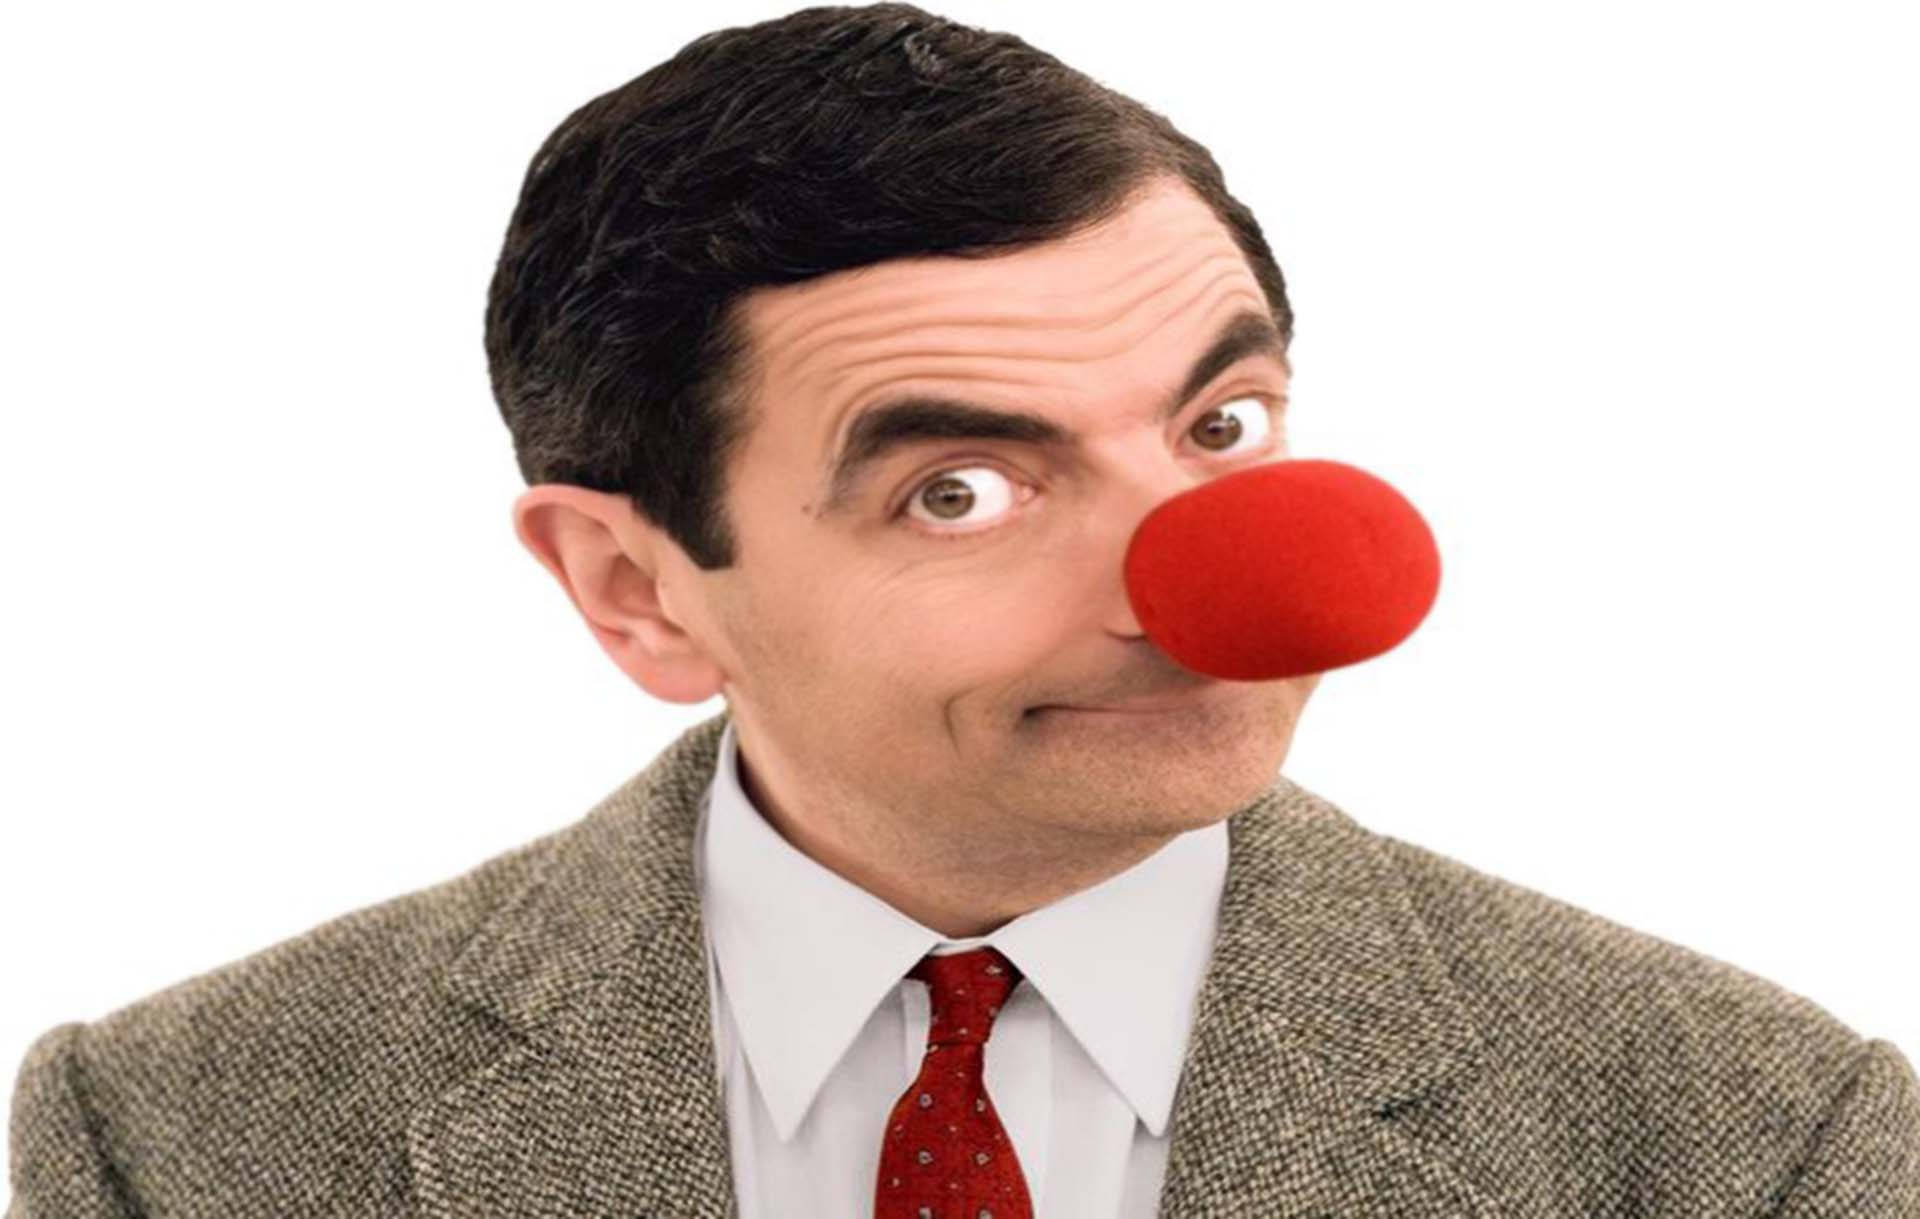 Funny Mr. Bean Red Nose Wallpaper